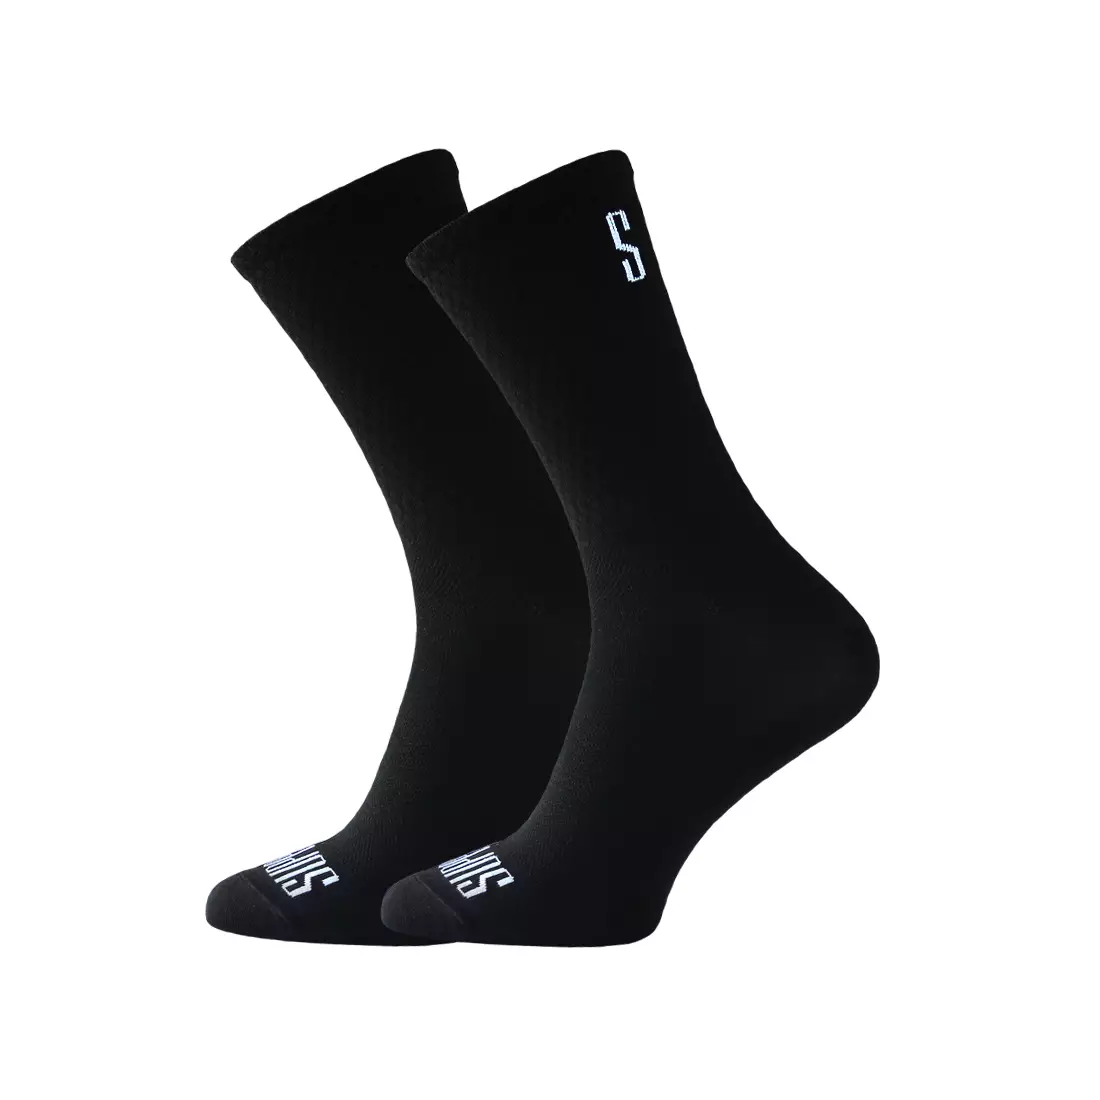 SUPPORT cycling socks BLACK'S